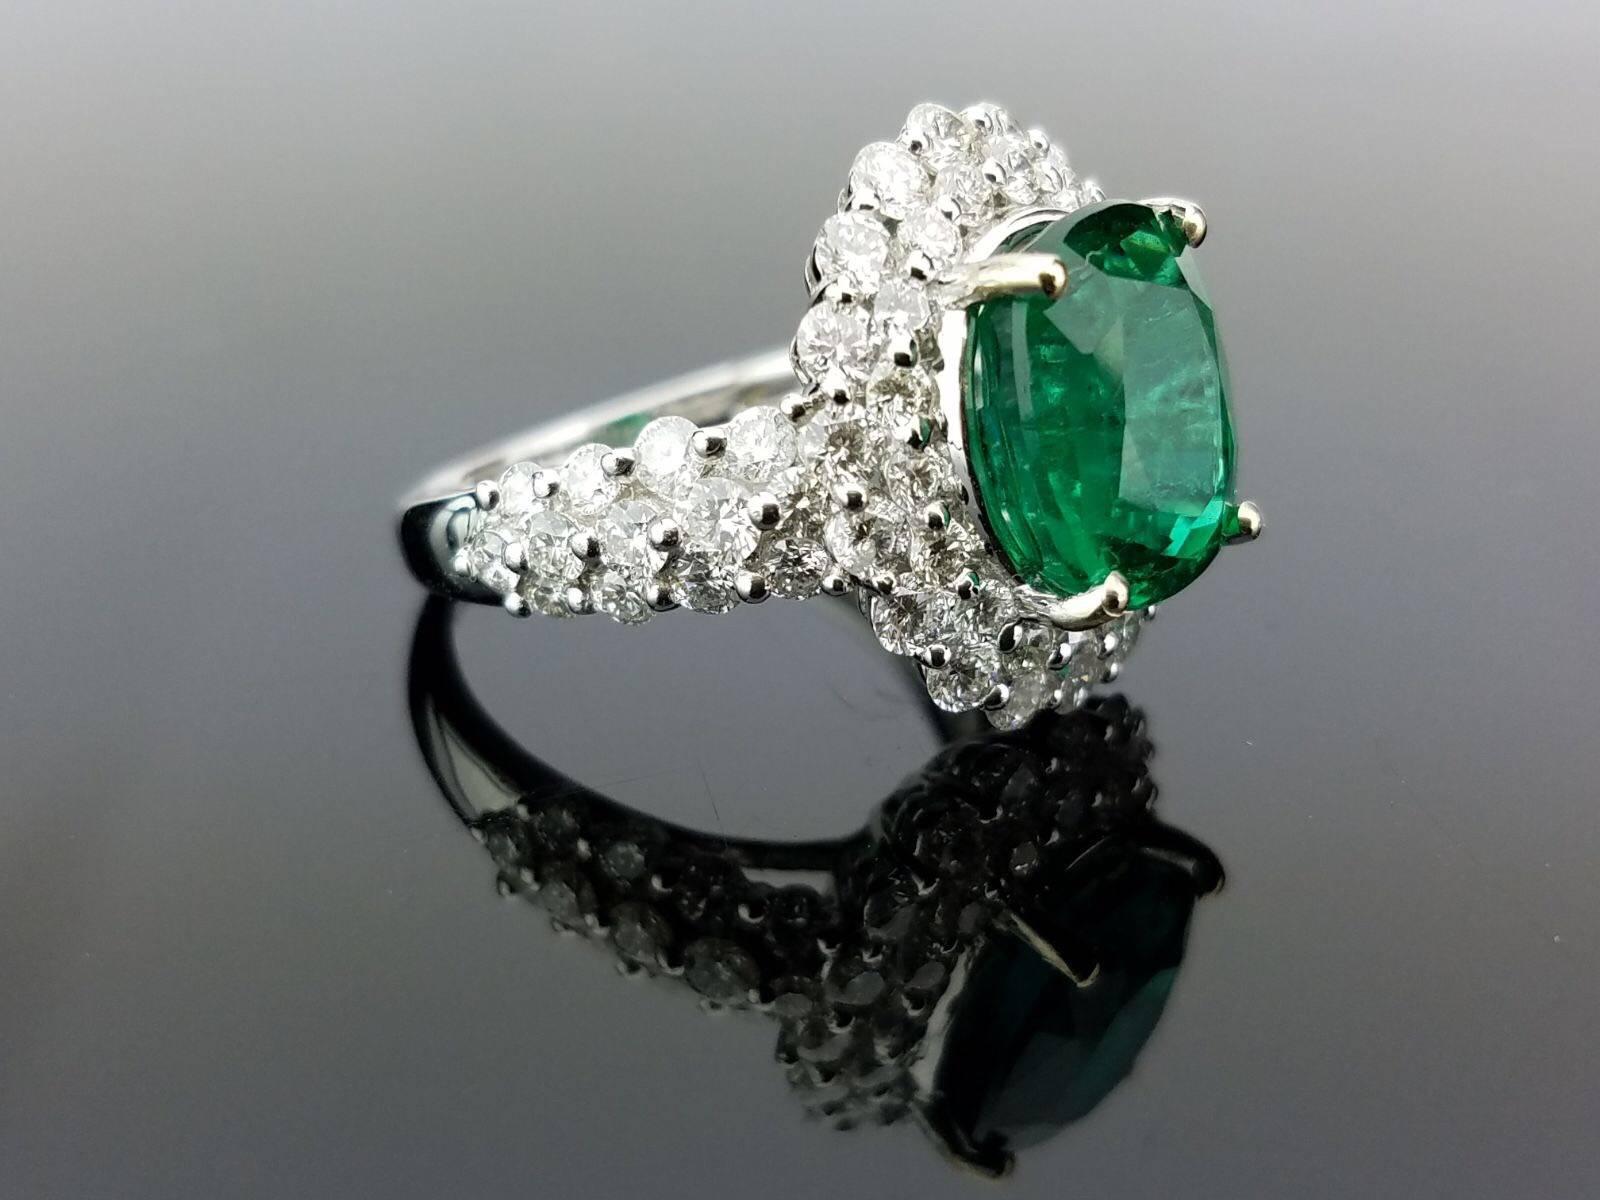 An elegant cocktail ring using a lustrous oval shape Emerald centre stone surrounded by brilliant cut white Diamonds, all set in 18K white gold. 

Stone Details: 
Stone: Zambian Emerald
Carat Weight: 3.91 Carats

Diamond Details: 
Total Carat